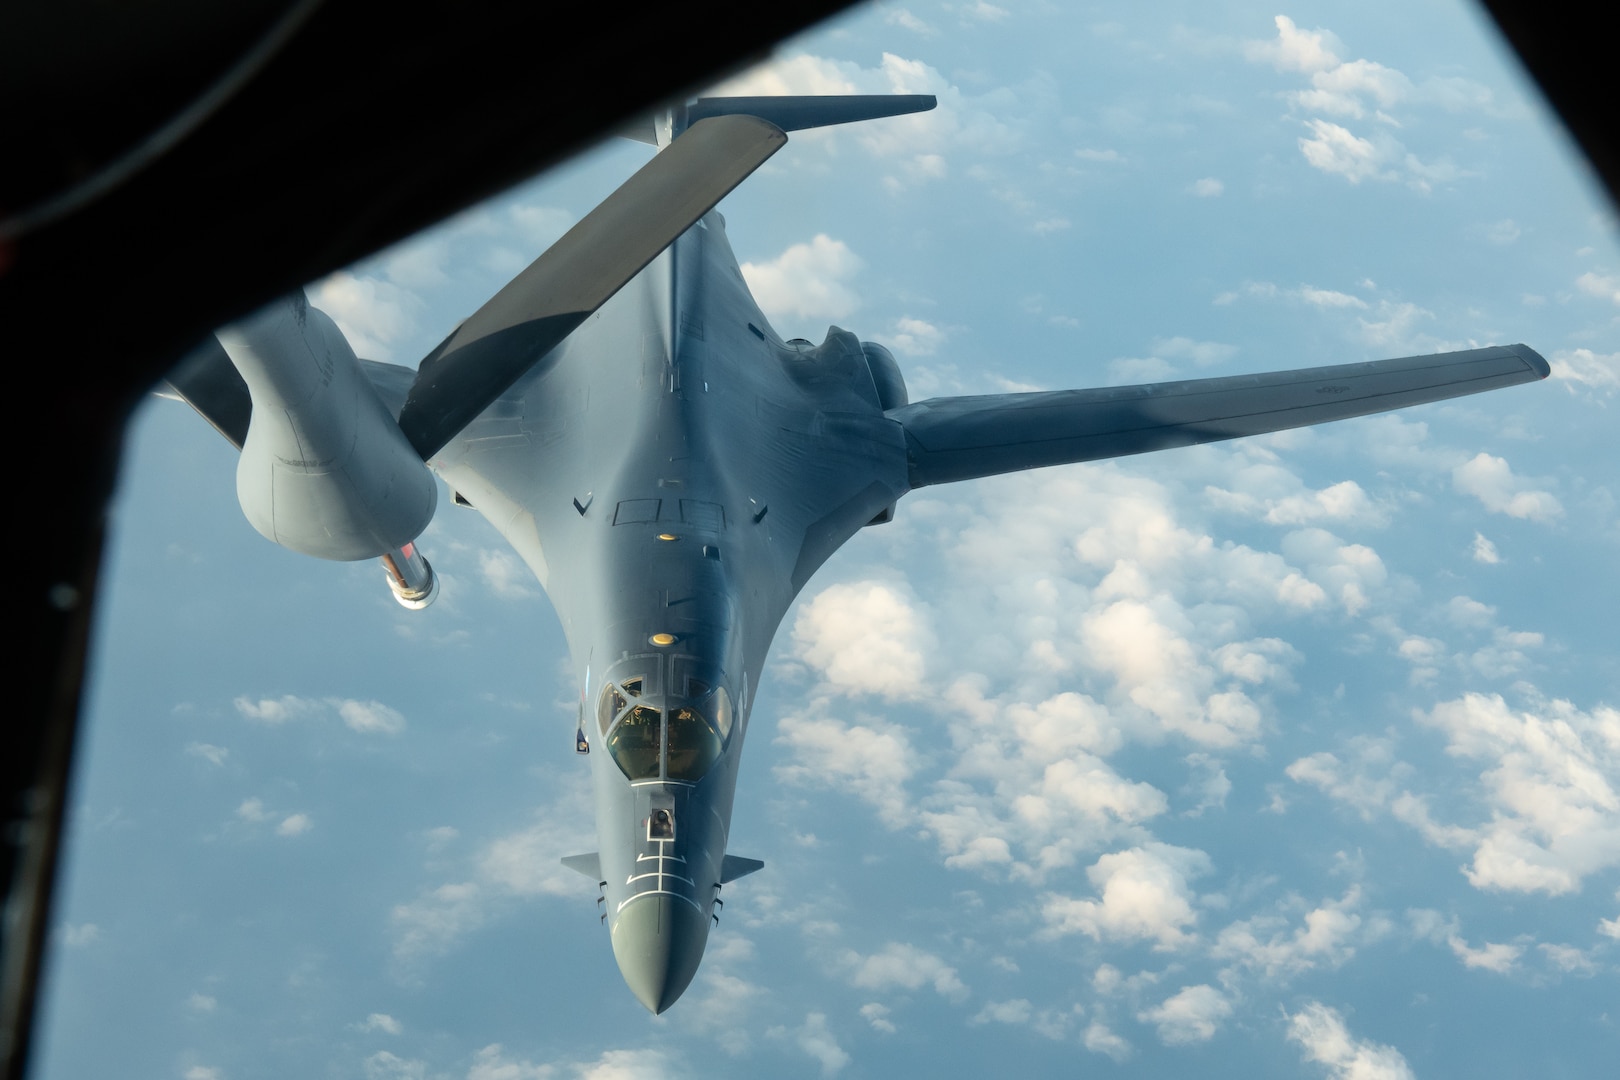 A U.S. Air Force B-1B Lancer from the 28th Bomb Wing, Ellsworth Air Force Base, S.D., approaches a KC-135 Stratotanker from the 909th Air Refueling Squadron, to refuel during a 32-hour round-trip sortie to conduct operations over the Pacific as part of a joint U.S. Indo-Pacific Command and U.S. Strategic Command (USSTRATCOM) Bomber Task Force (BTF) mission April 30, 2020. This operation demonstrates the U.S. Air Force’s dynamic force employment model in line with the National Defense Strategy’s objectives of strategic predictability with persistent bomber presence, assuring allies and partners. (U.S. Air Force photo by Senior Airman Cynthia Belío)